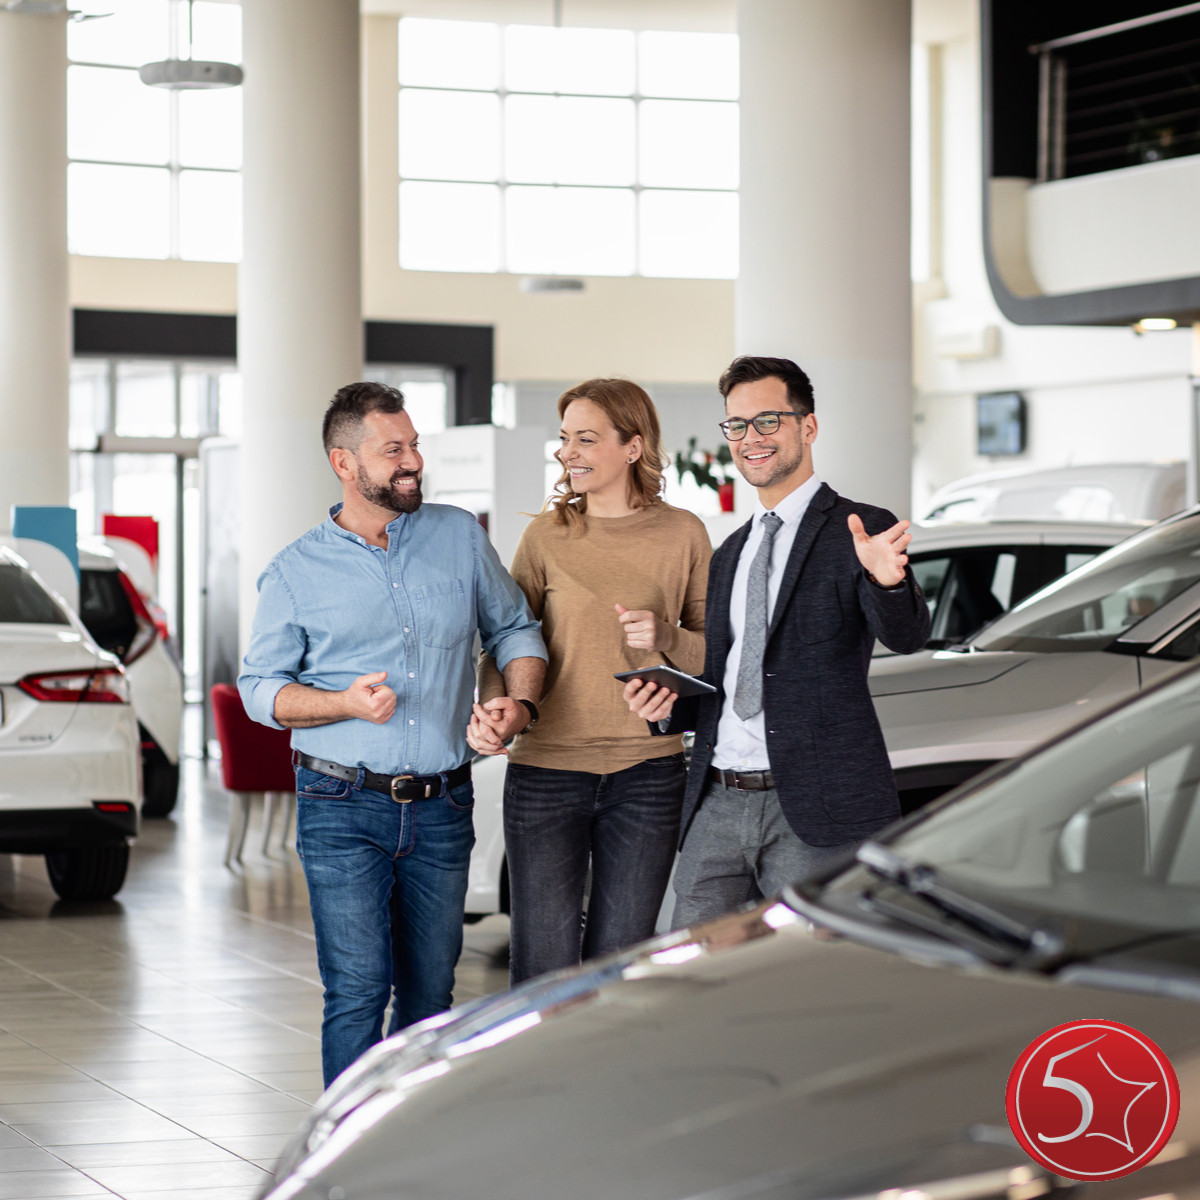 5 Star Auto Plaza Makes Used Car Shopping Easier For St. Peters Drivers